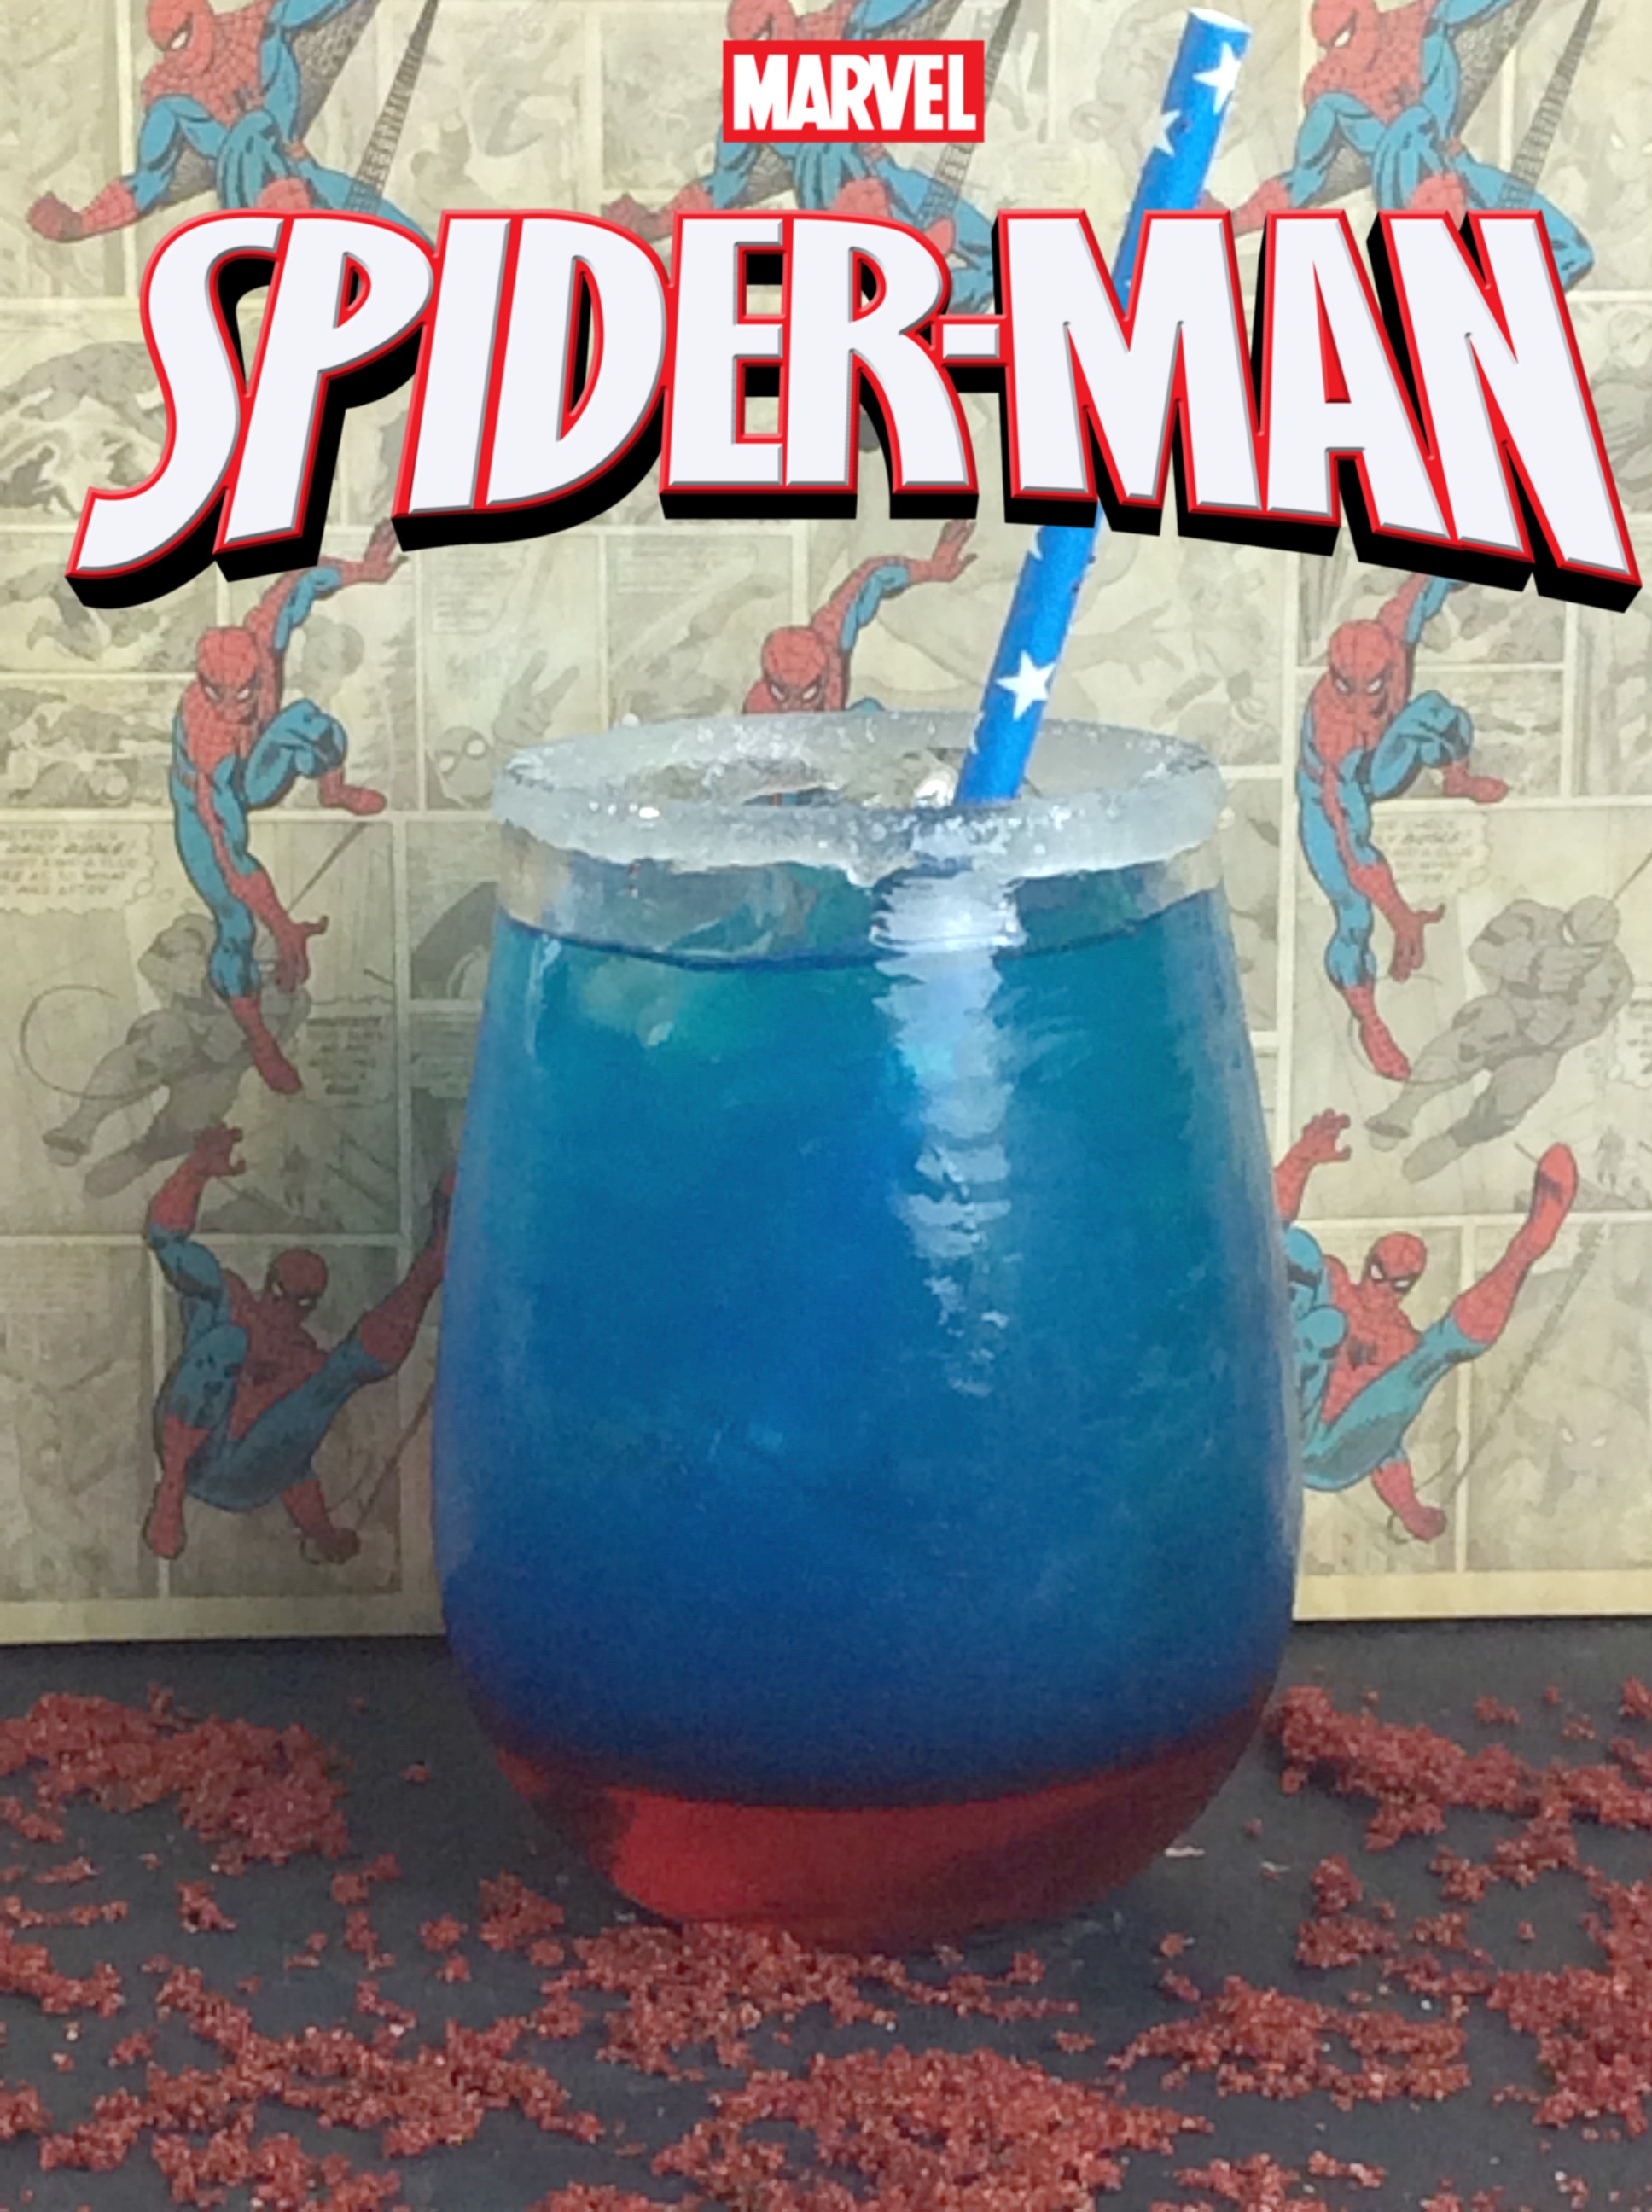 Whether you are looking for a non-alcoholic punch for kids or you have an Amazing Spiderman fan, this simple to make punch is going to make everyone happy.